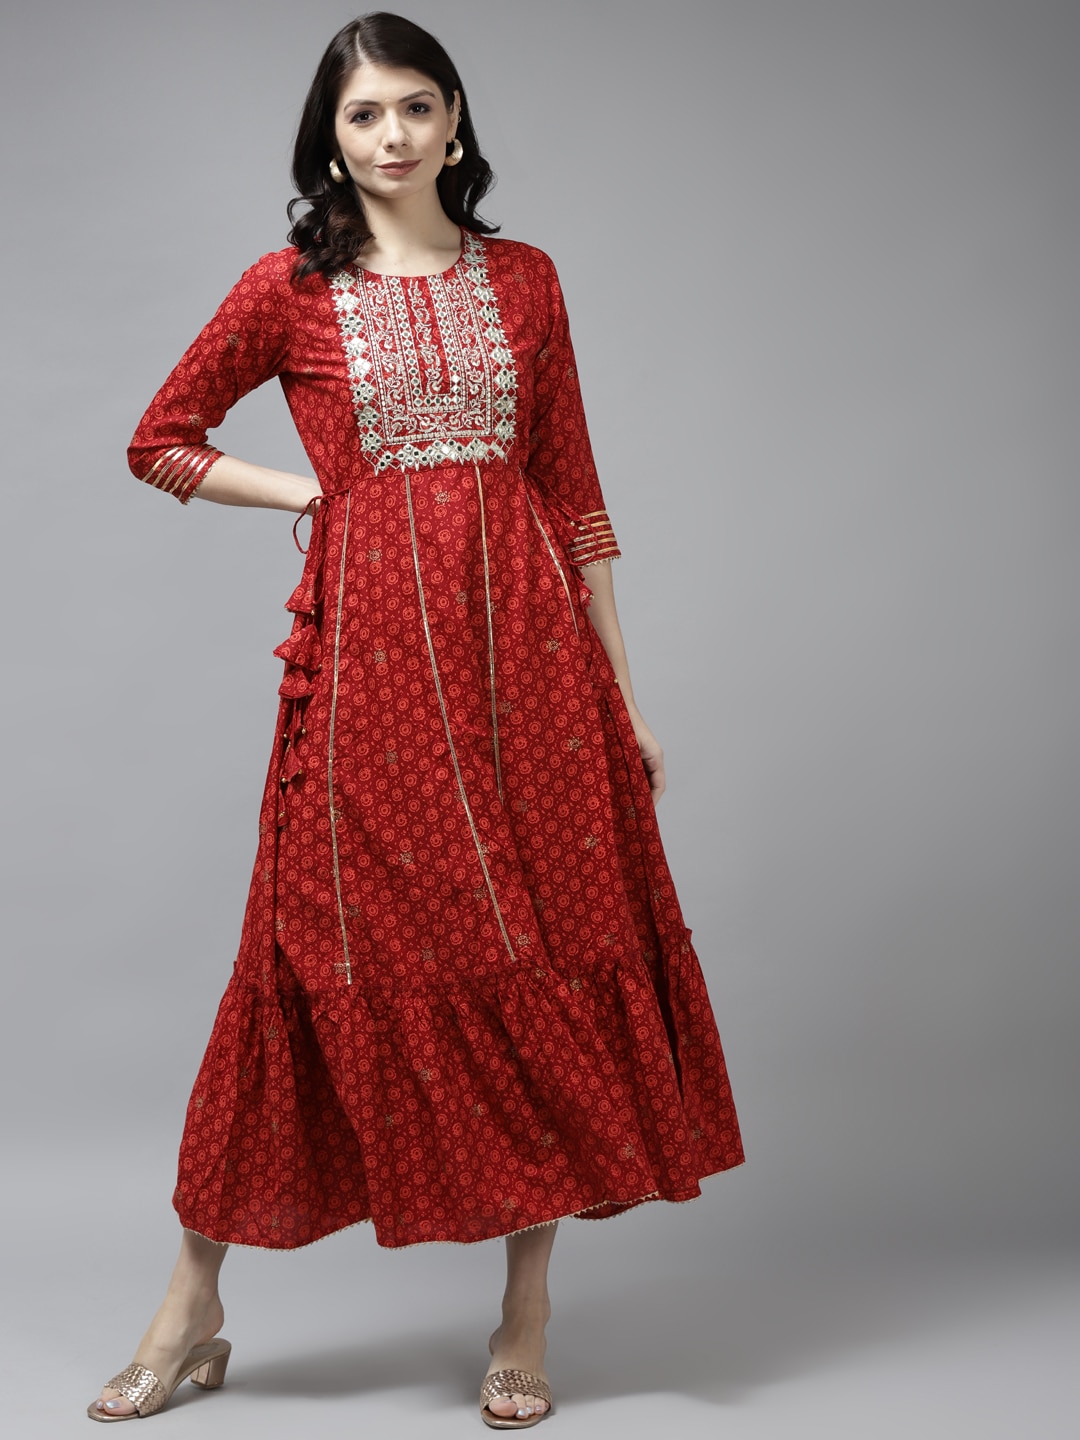 Yufta Red & Golden Ethnic Motifs Embroidered A-Line Midi Dress Price in India